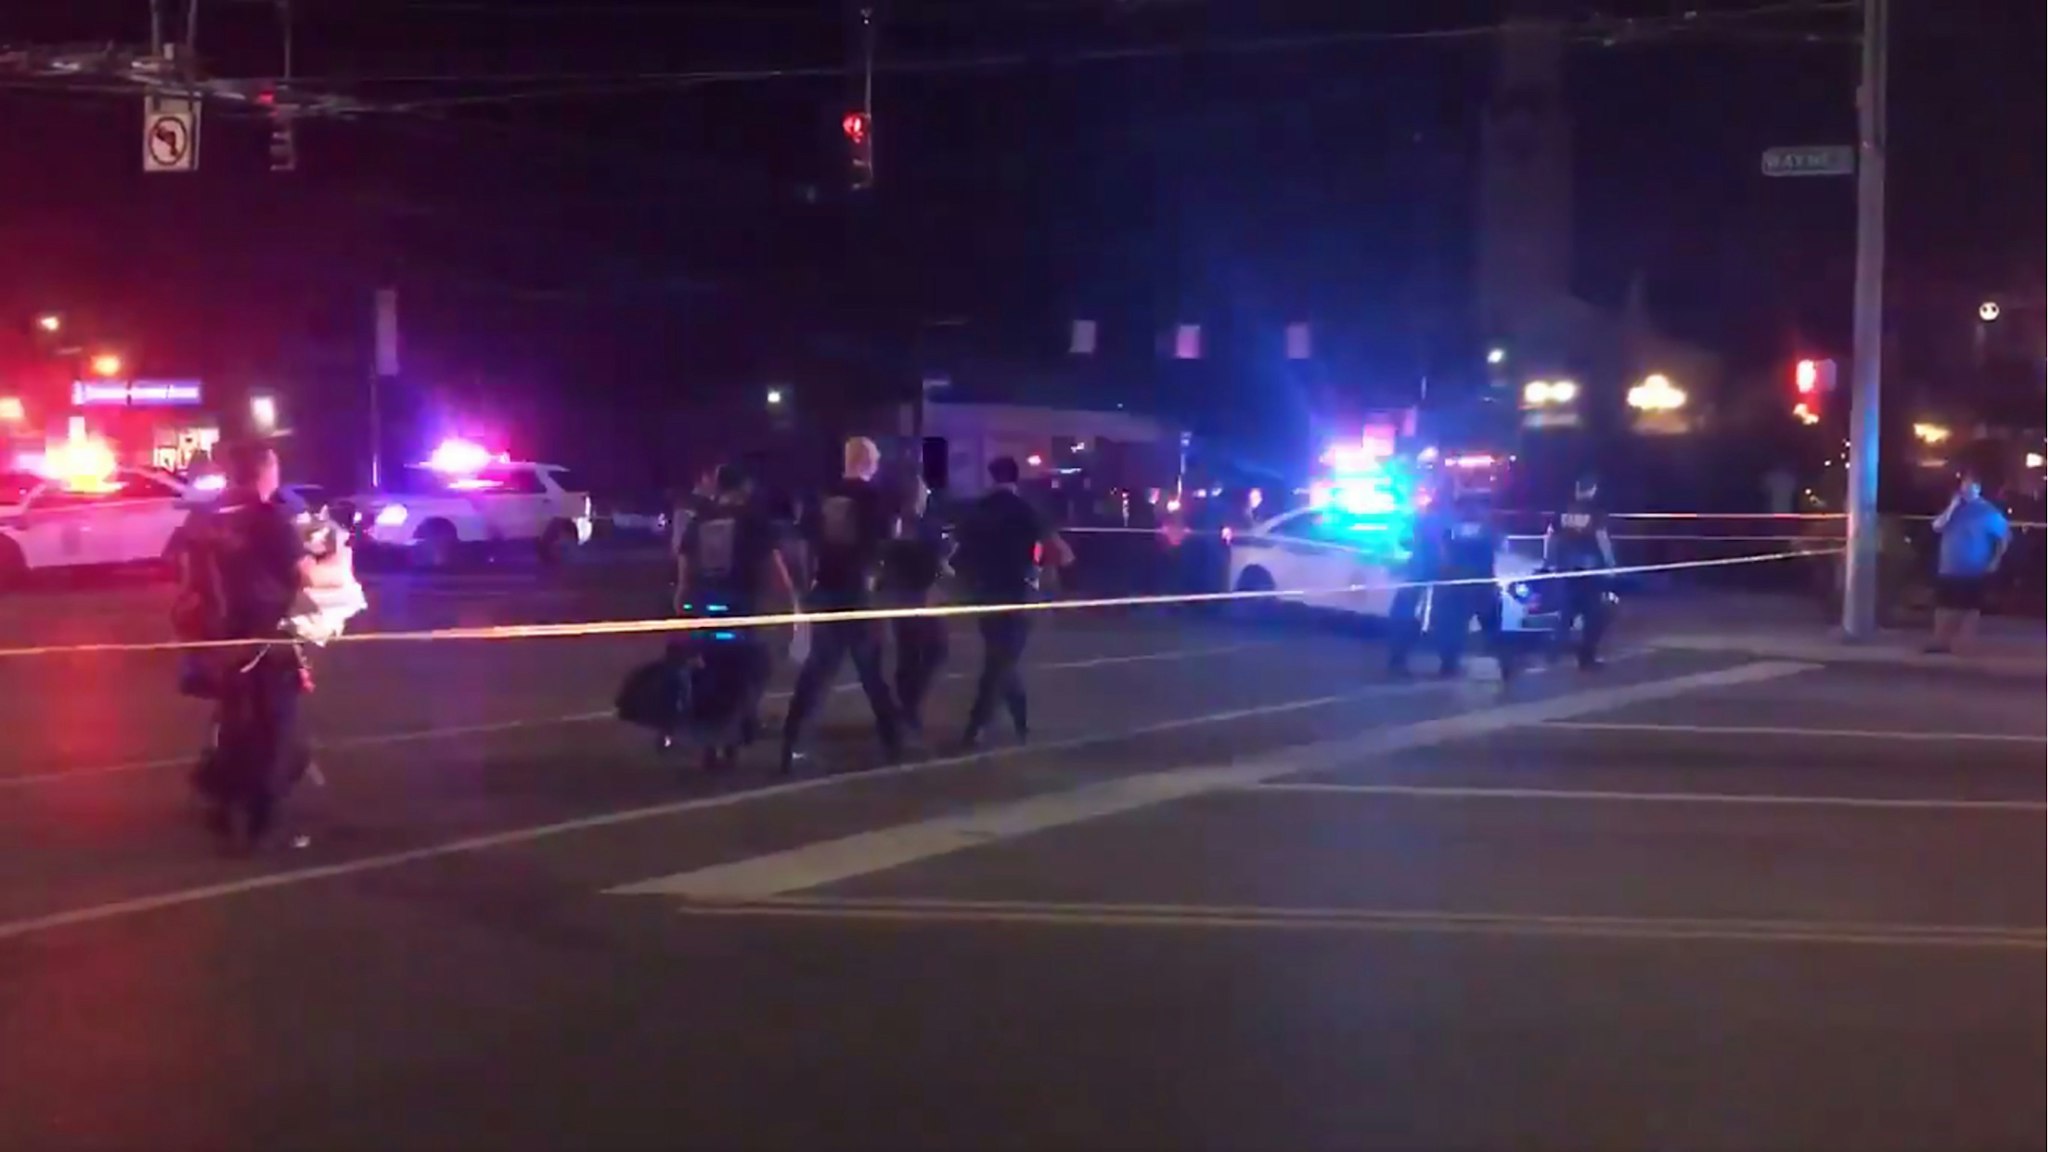 This videograb taken from the Twitter account of Derek Myers on August 4, 2019 shows police officers walking behind police cordon following a mass shooting in the popular bar and nightlife Oregon district in Dayton, Ohio.